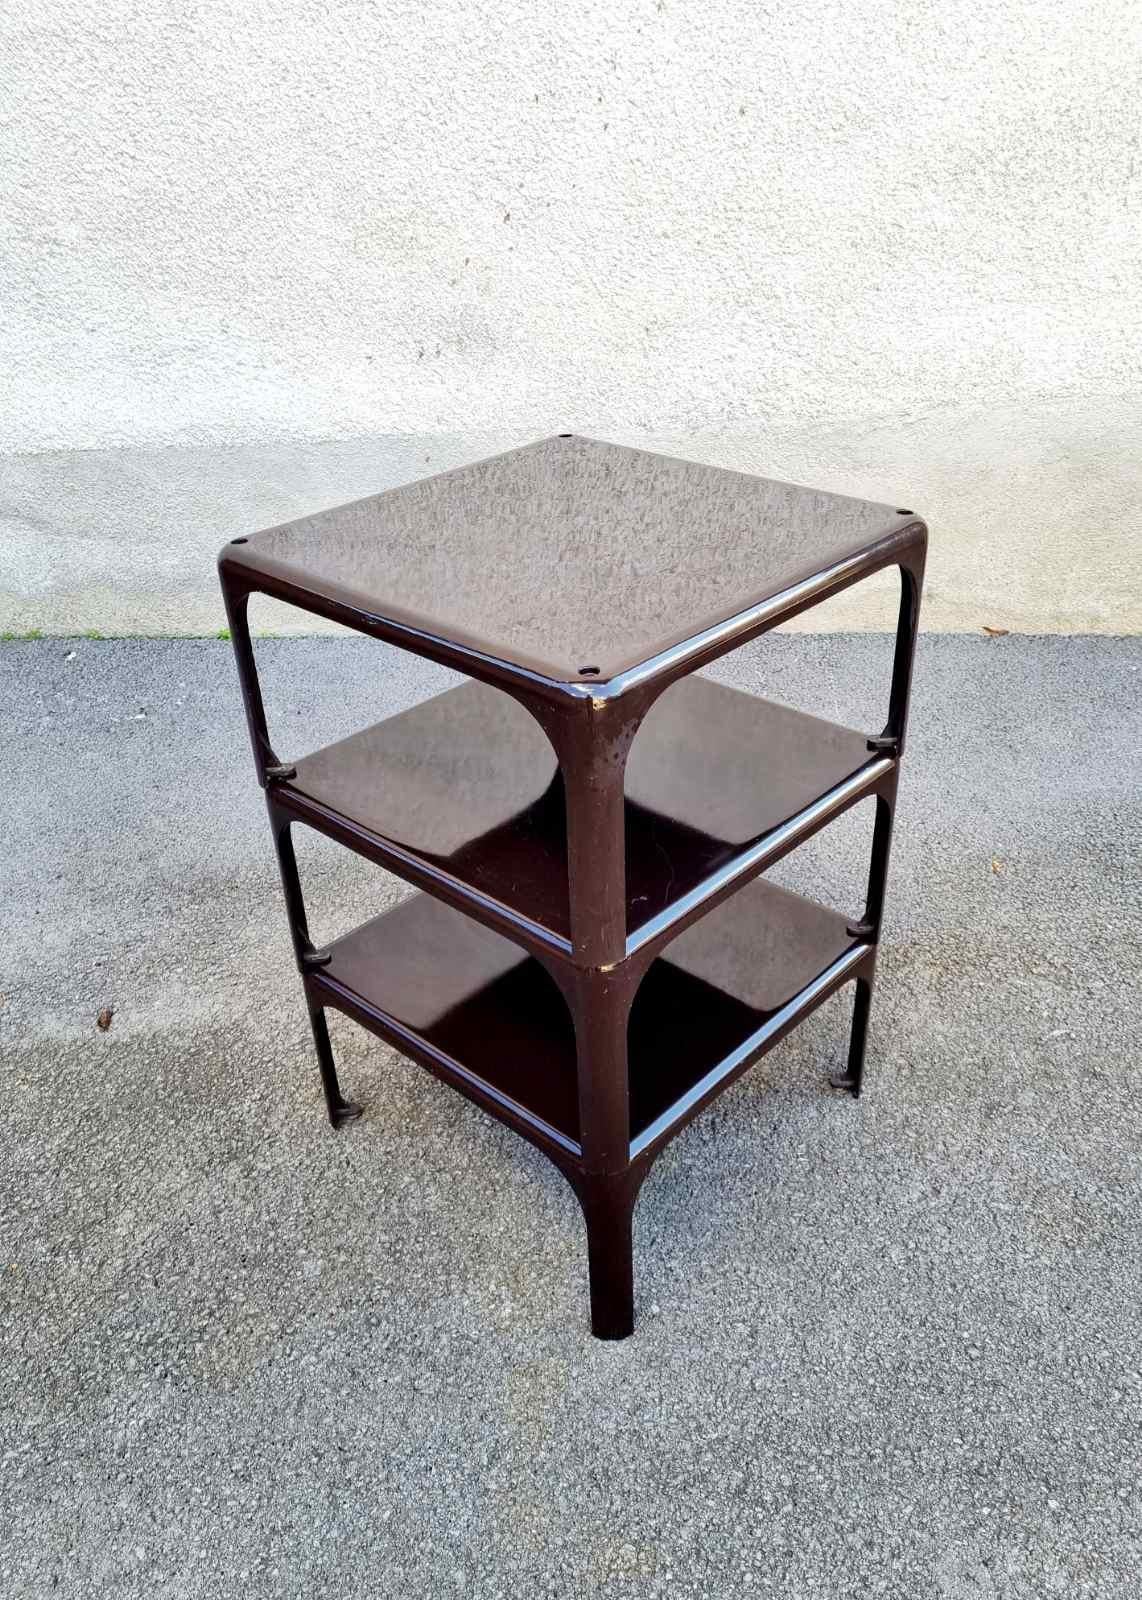 Stackable Tables Demetrio 45 by Vico Magistretti for Artemide, Italy 60s For Sale 6